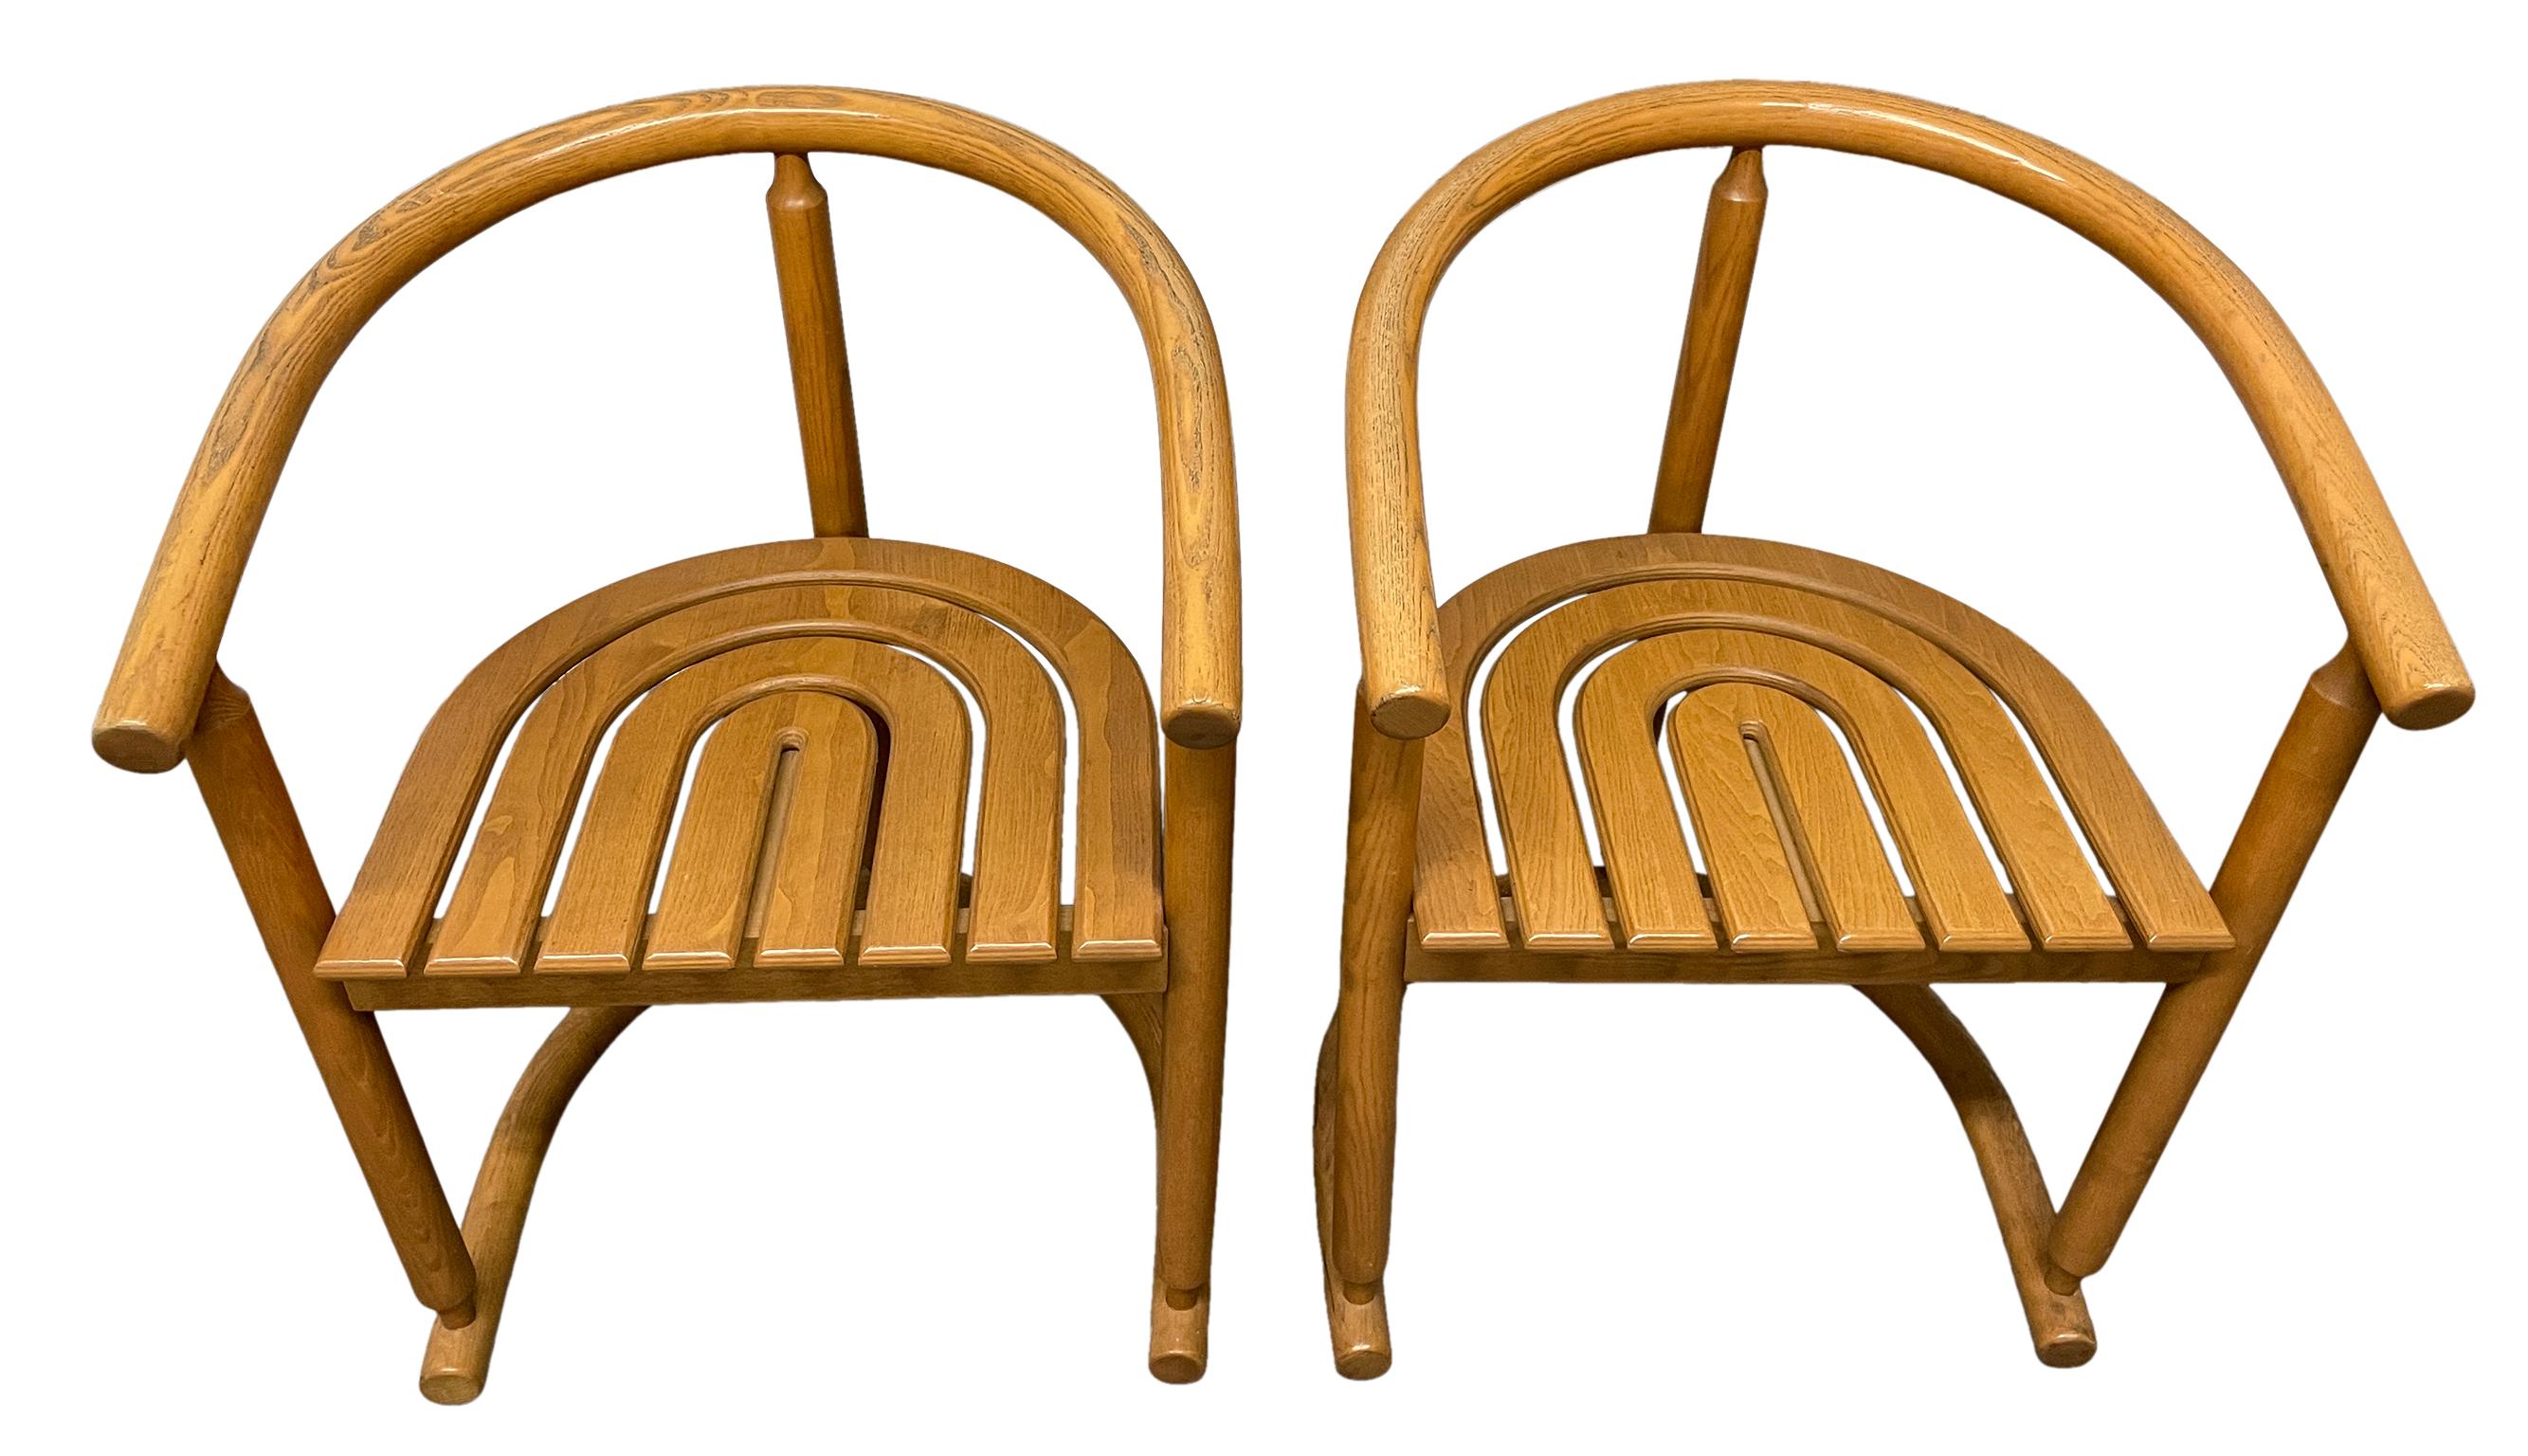 Pair of Mid-Century Modern solid oak horseshoe arm chairs by German company Allmilmö - Style of Nanna Ditzel. Beautiful designed pair of chairs. Amazing woodwork all Solid Oak curved wood and arched seat. Flat head screws used to assemble. No labels